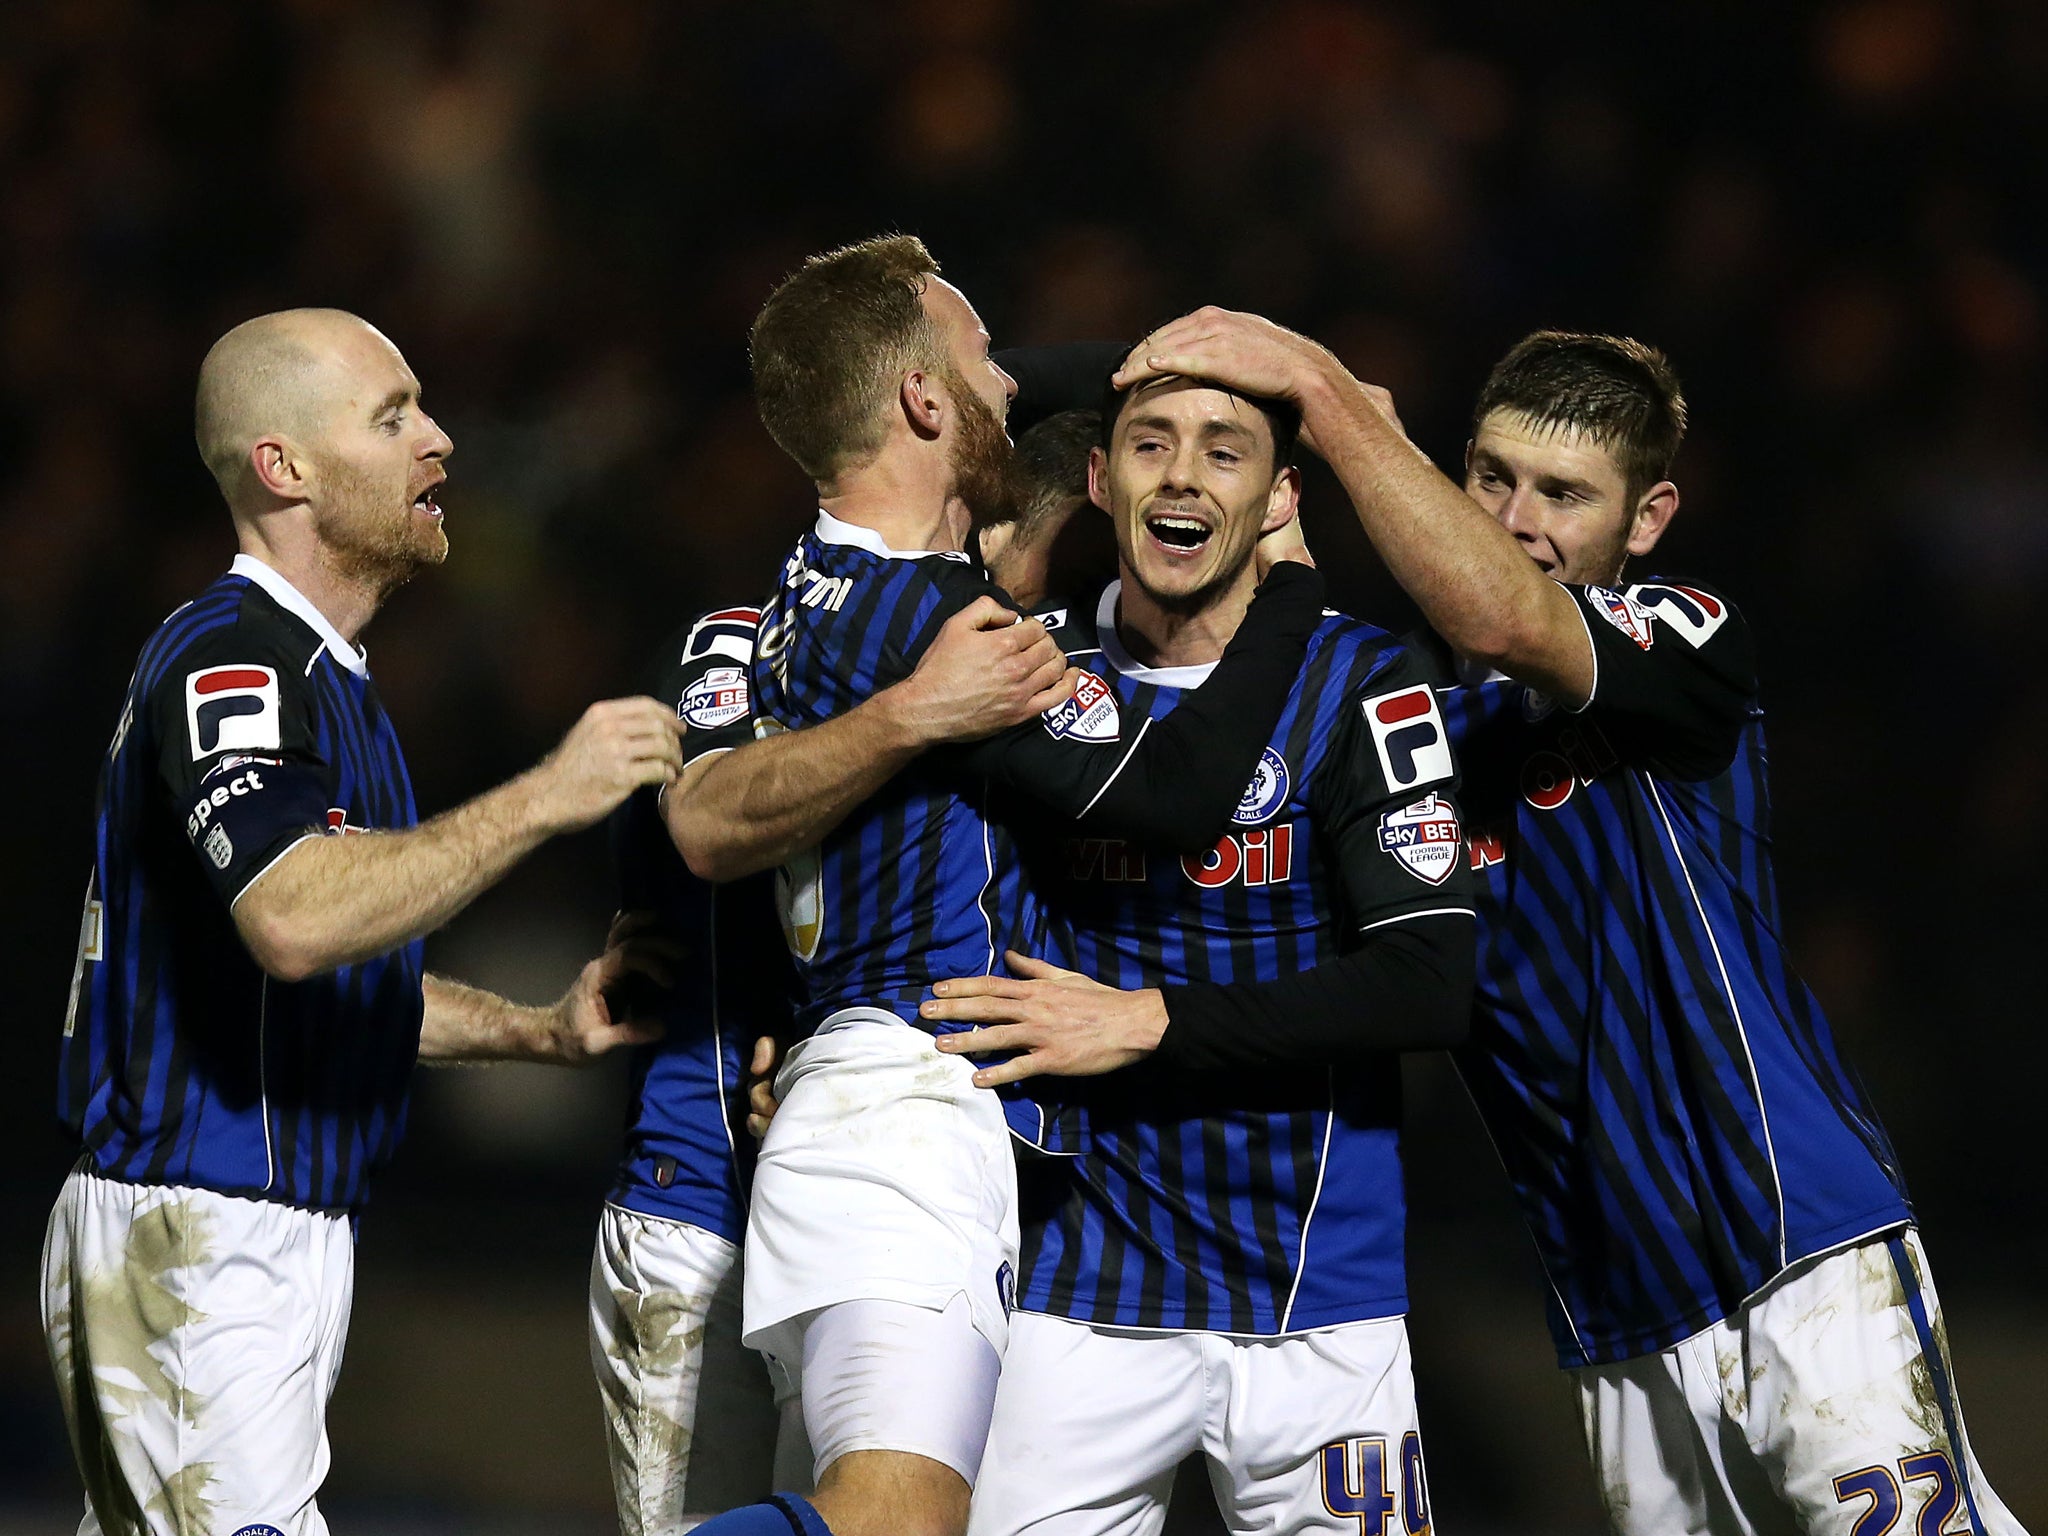 Ian Henderson celebrates after scoring for Rochdale in their 2-0 win over Leeds